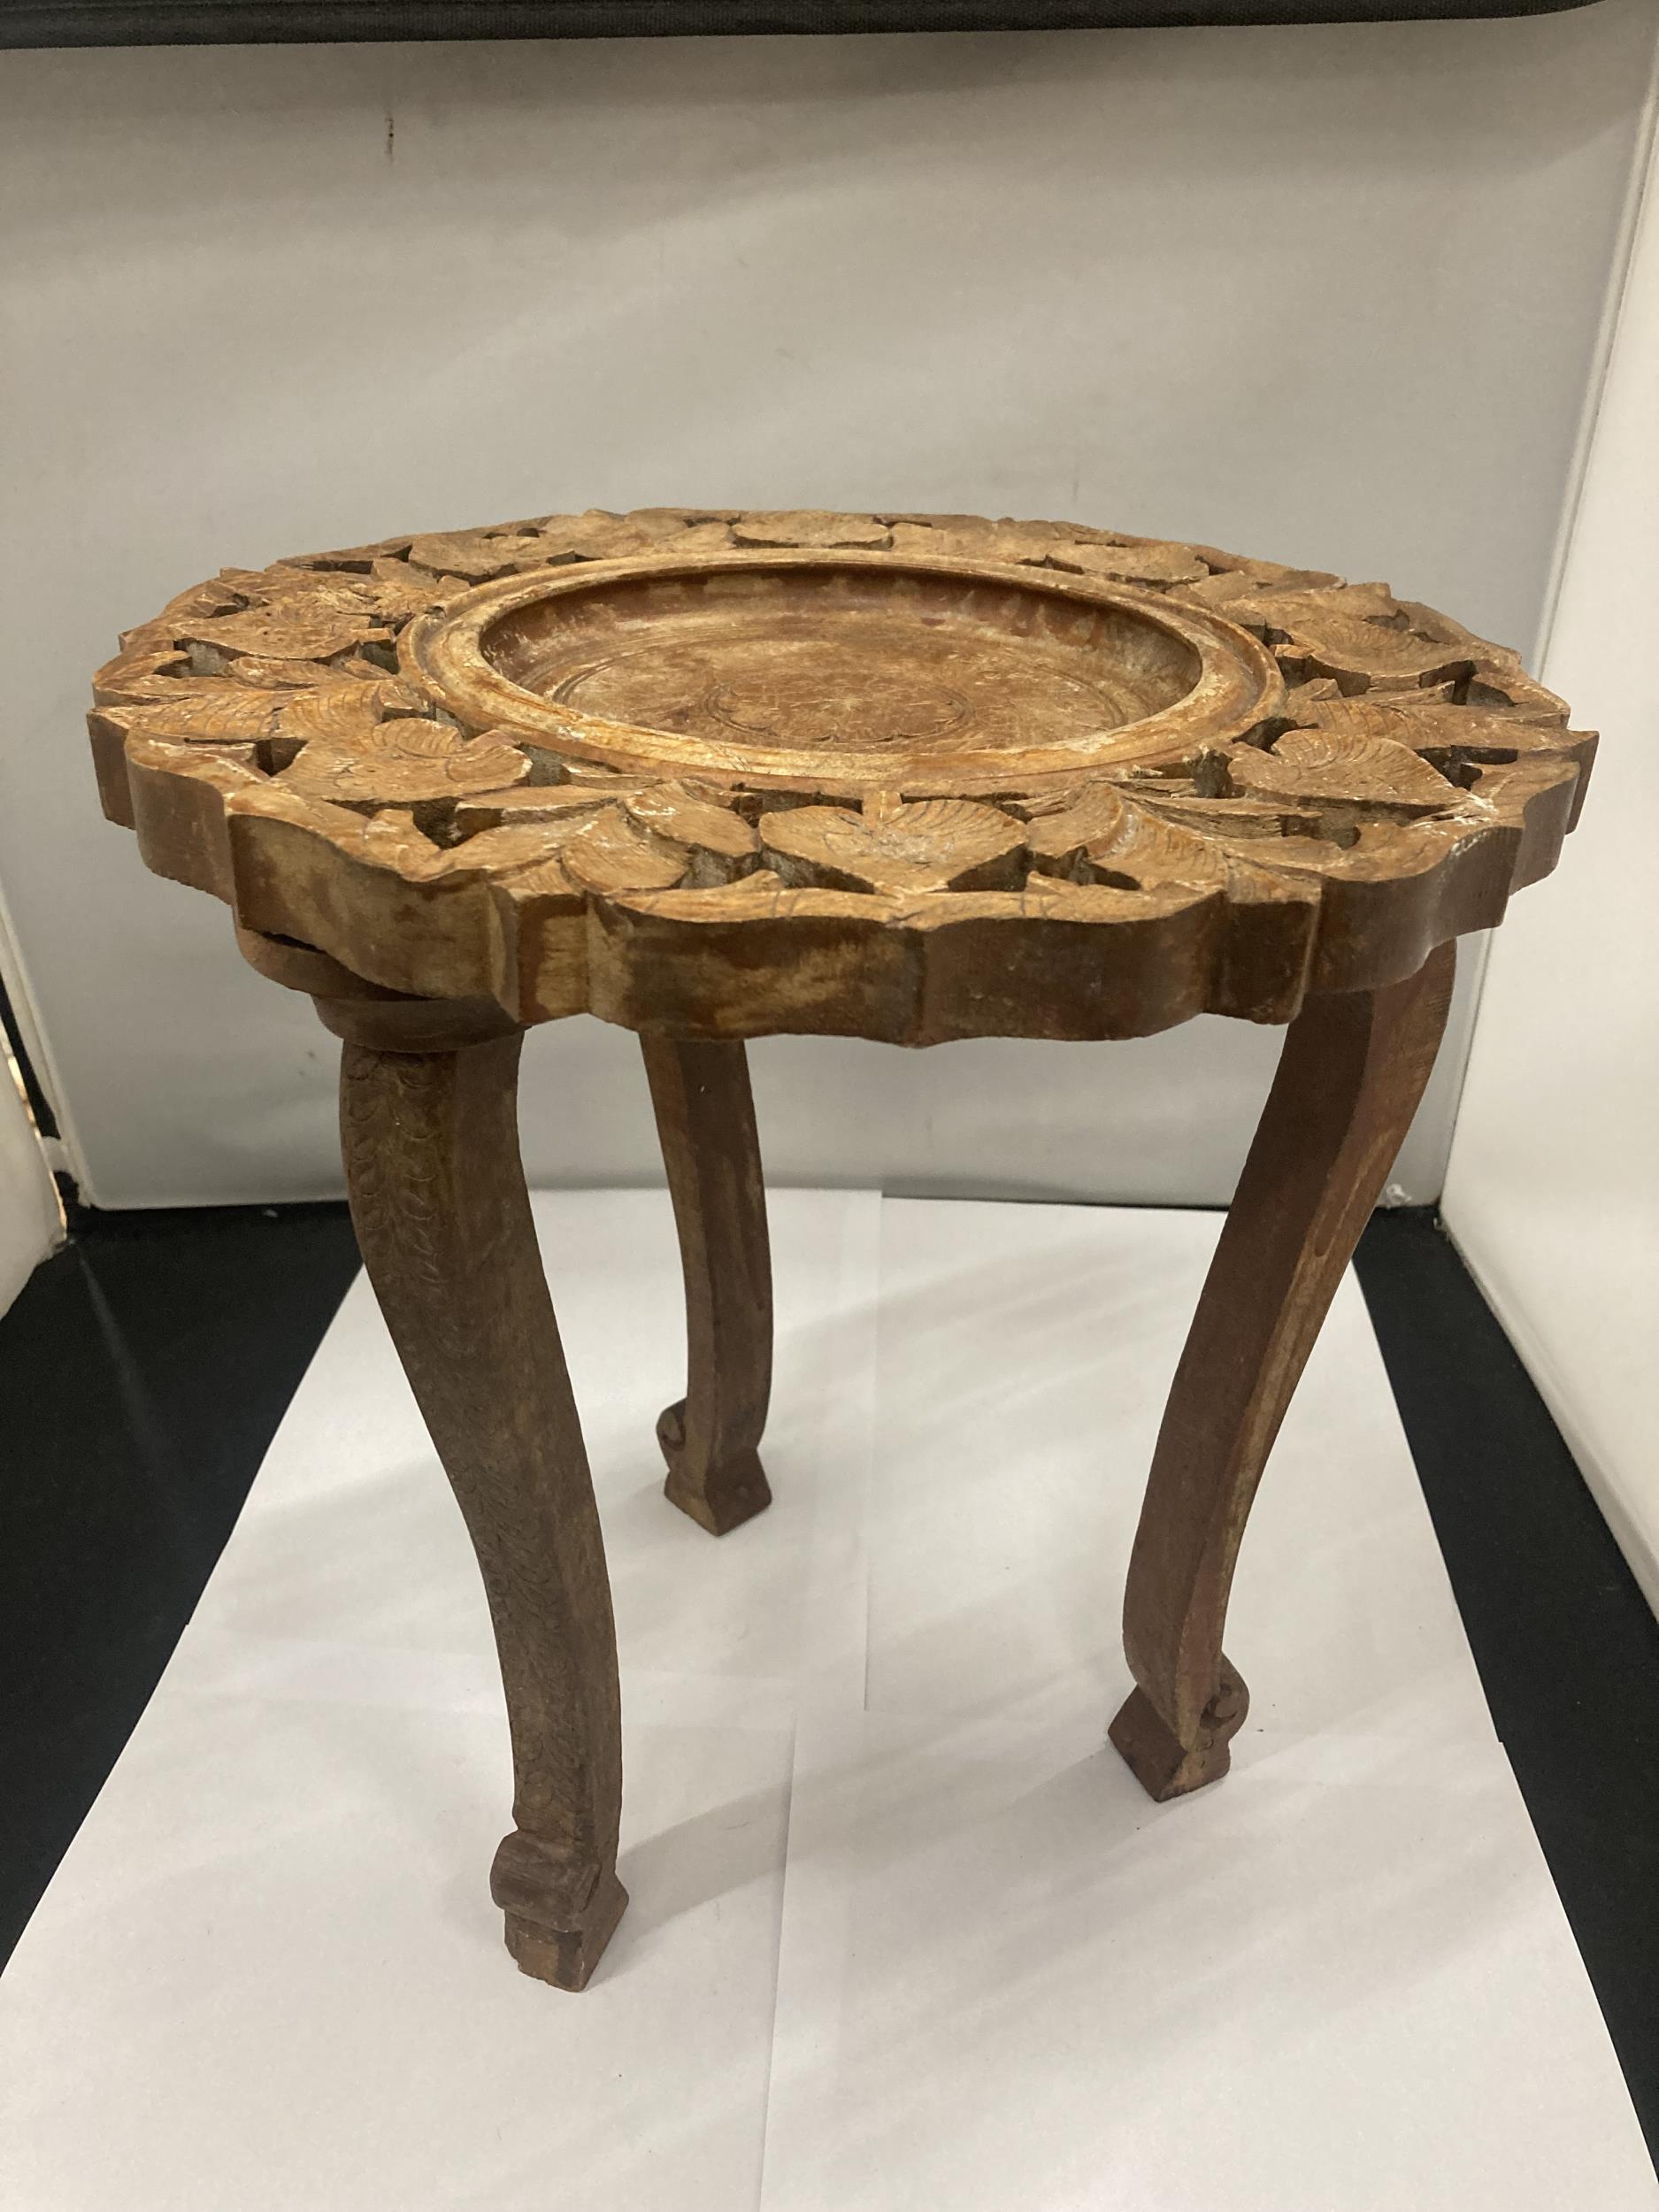 AN ASIAN STYLE SMALL WOODEN TABLE WITH CARVED DECORATION HEIGHT 32CM - Image 2 of 2